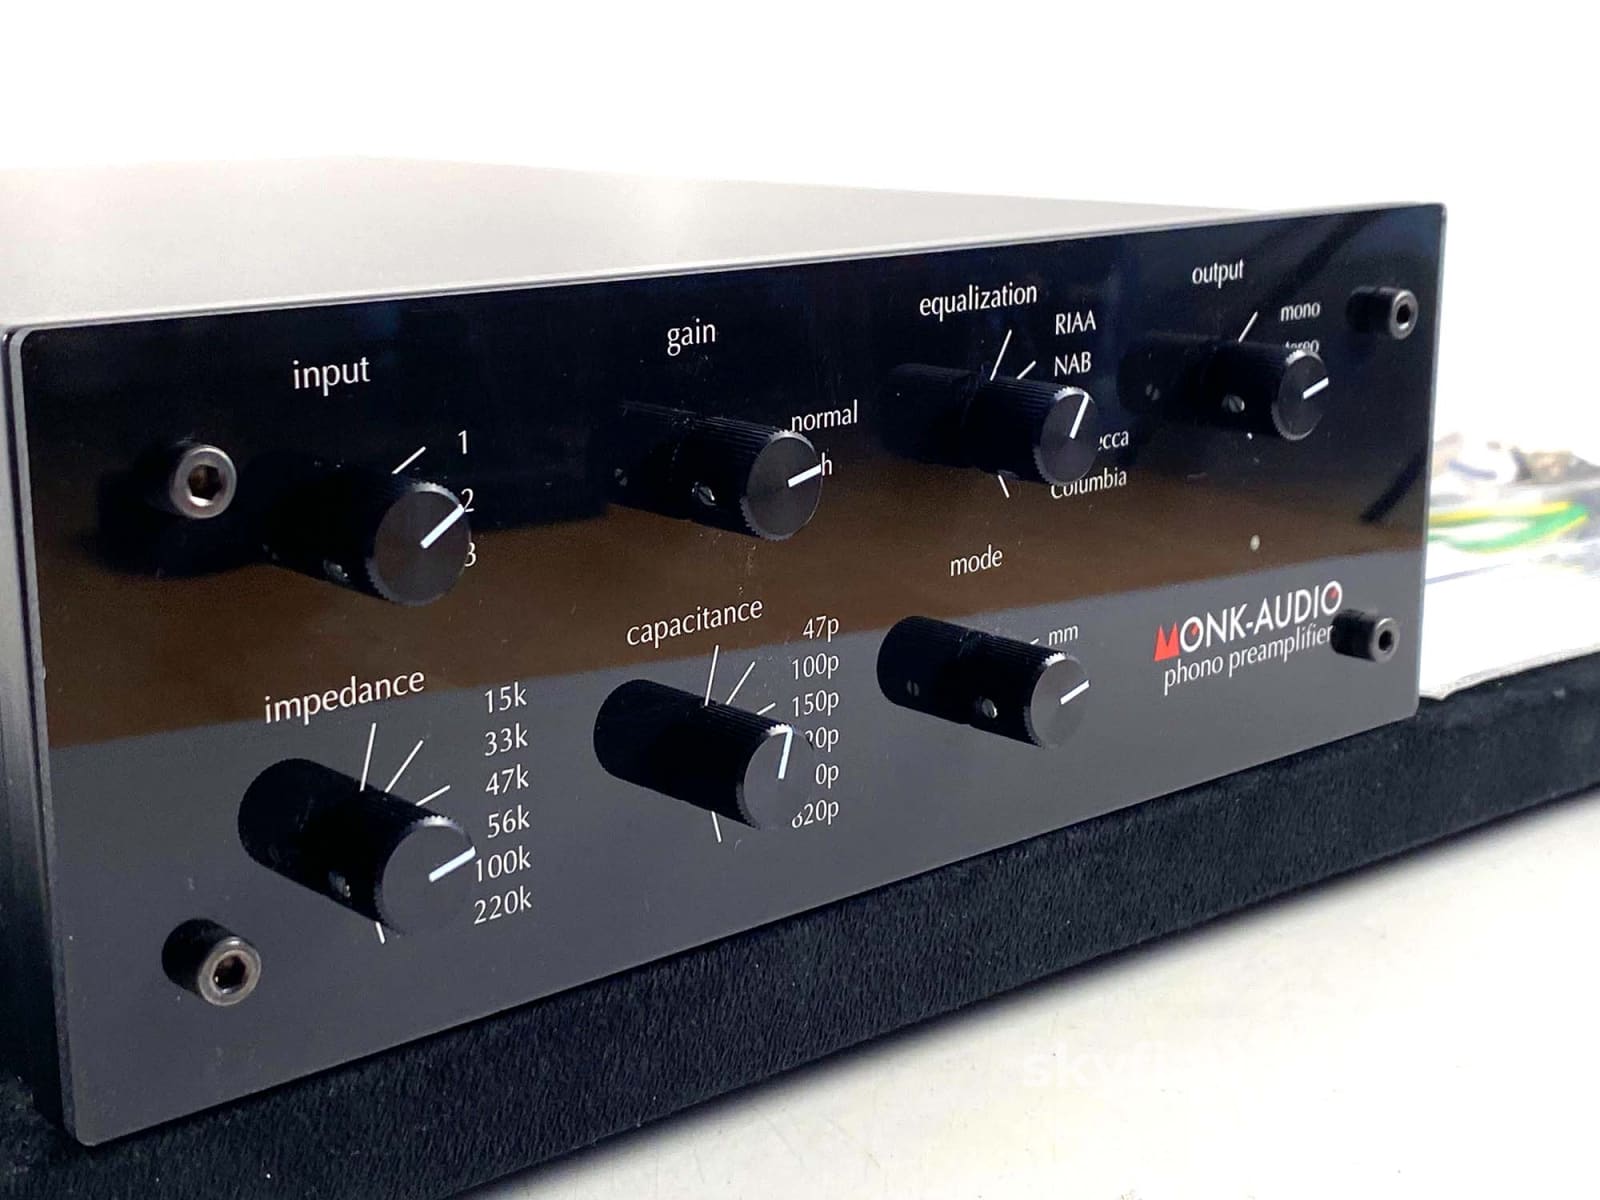 Monk Audio Phono Preamp With Upgraded Powerpak Iii Power Supply Preamplifier